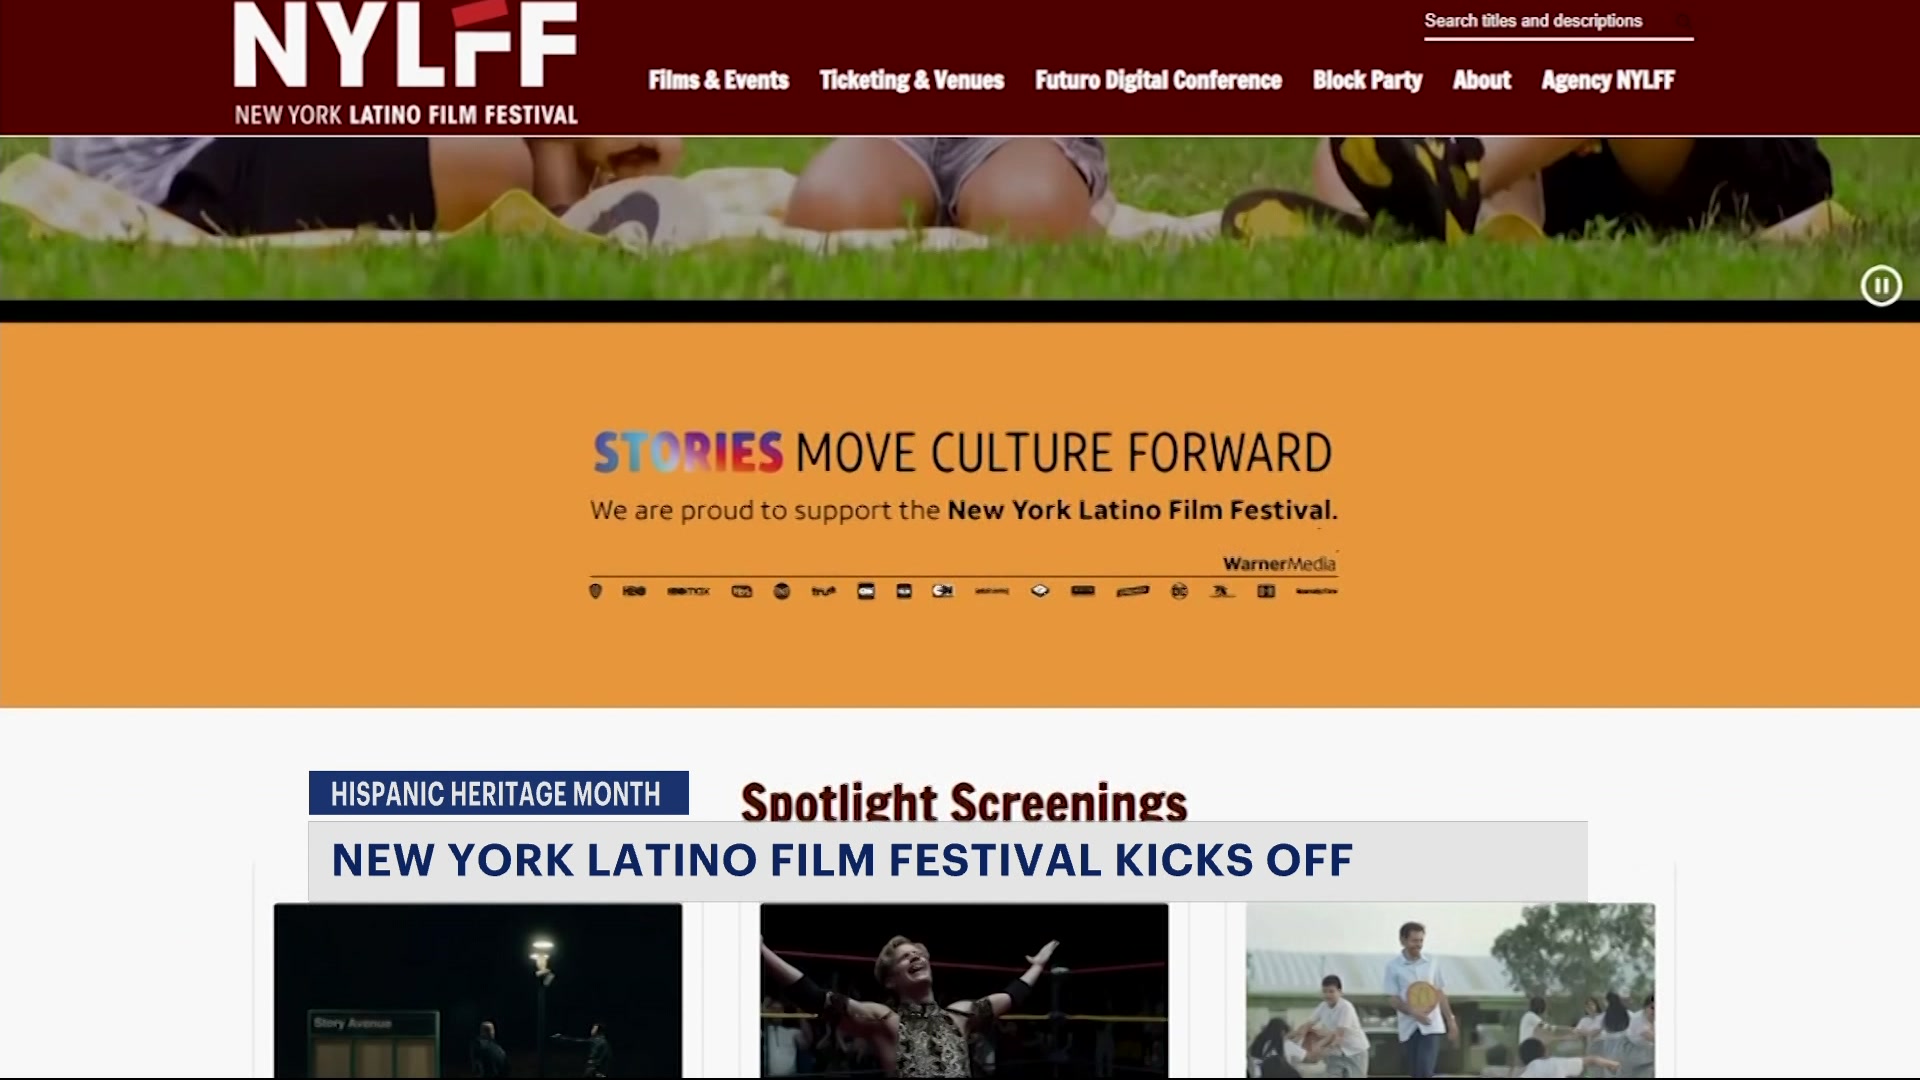 Hispanic Heritage Month Events in NYC